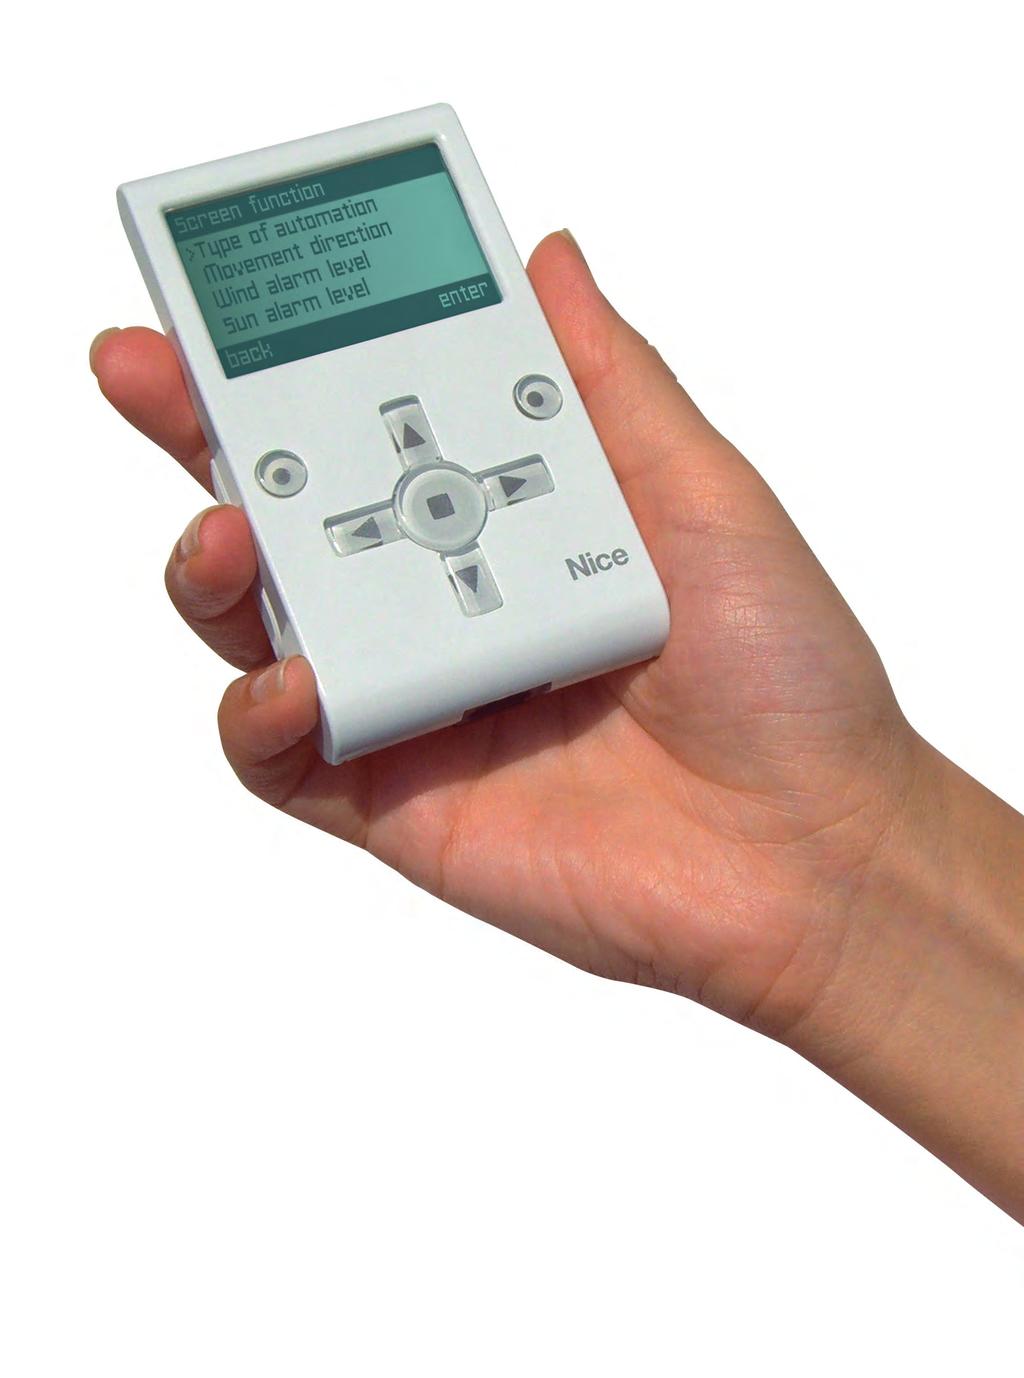 The simple interface of the O-View TT allows even absolute beginners to programme